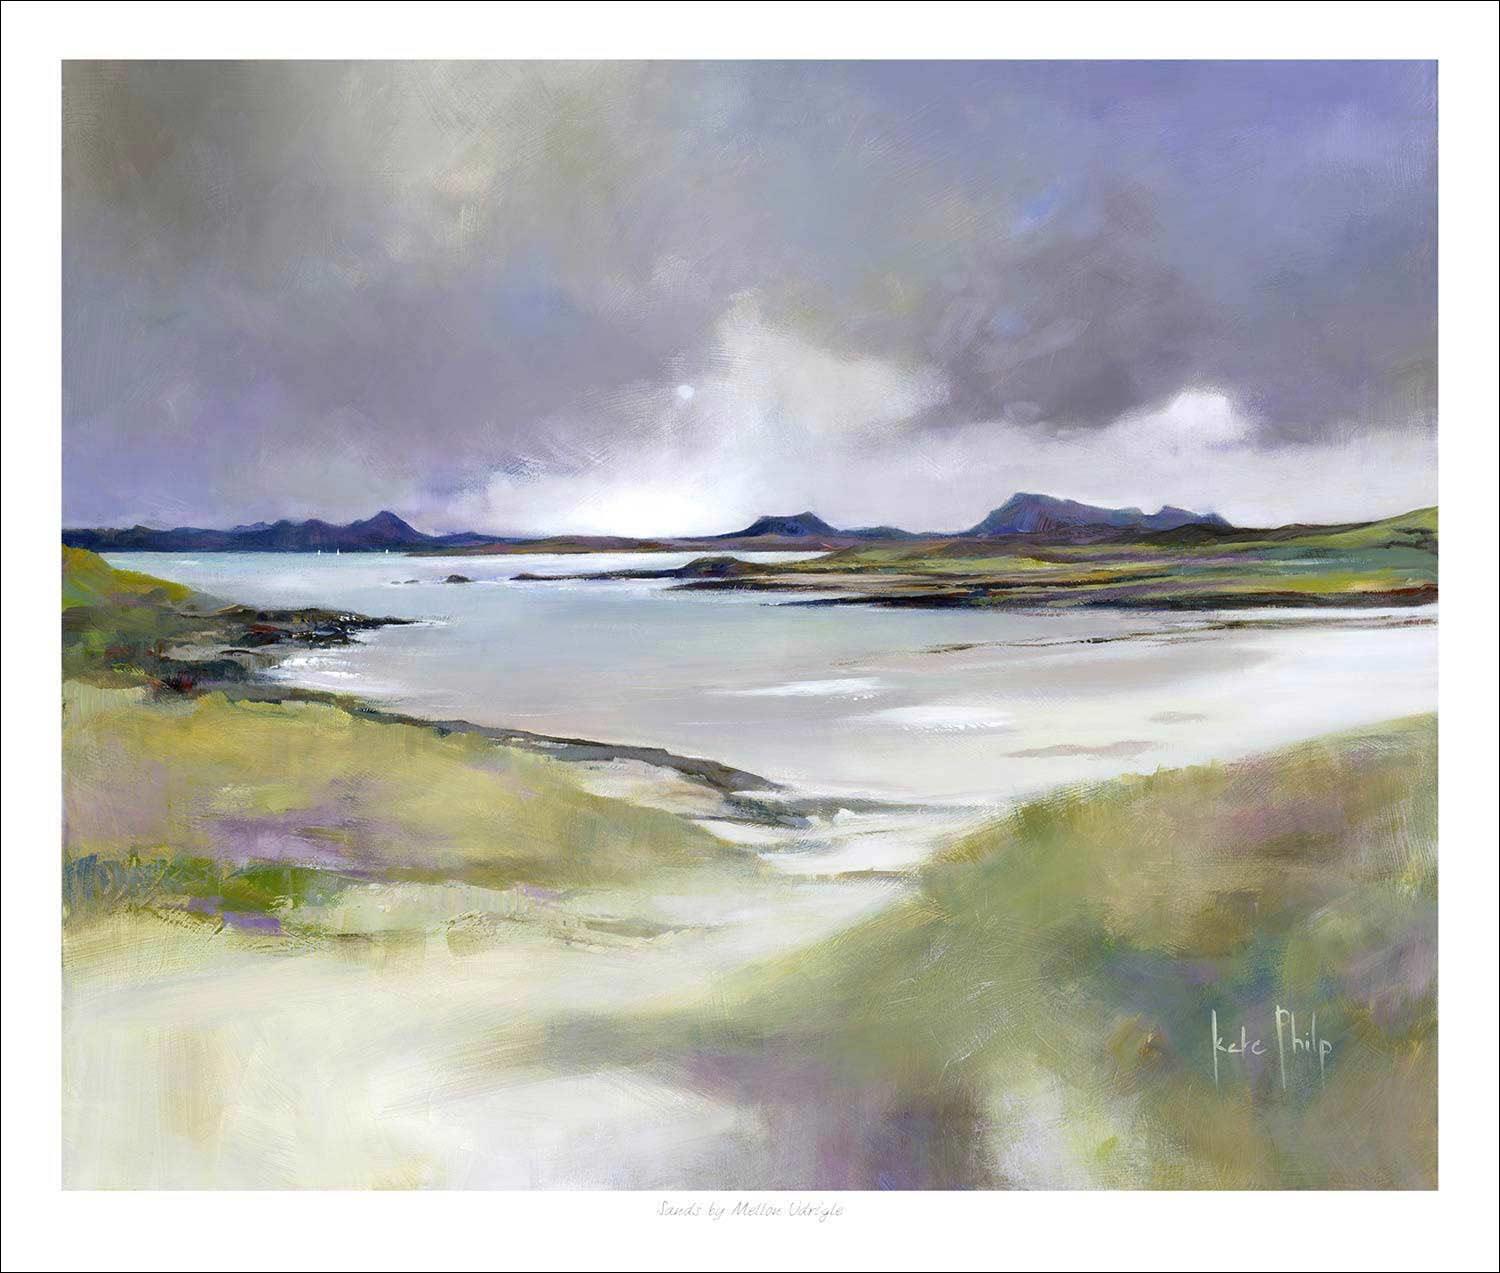 Sands by Mellon Udrigle Art Print from an original painting by artist Kate Philp